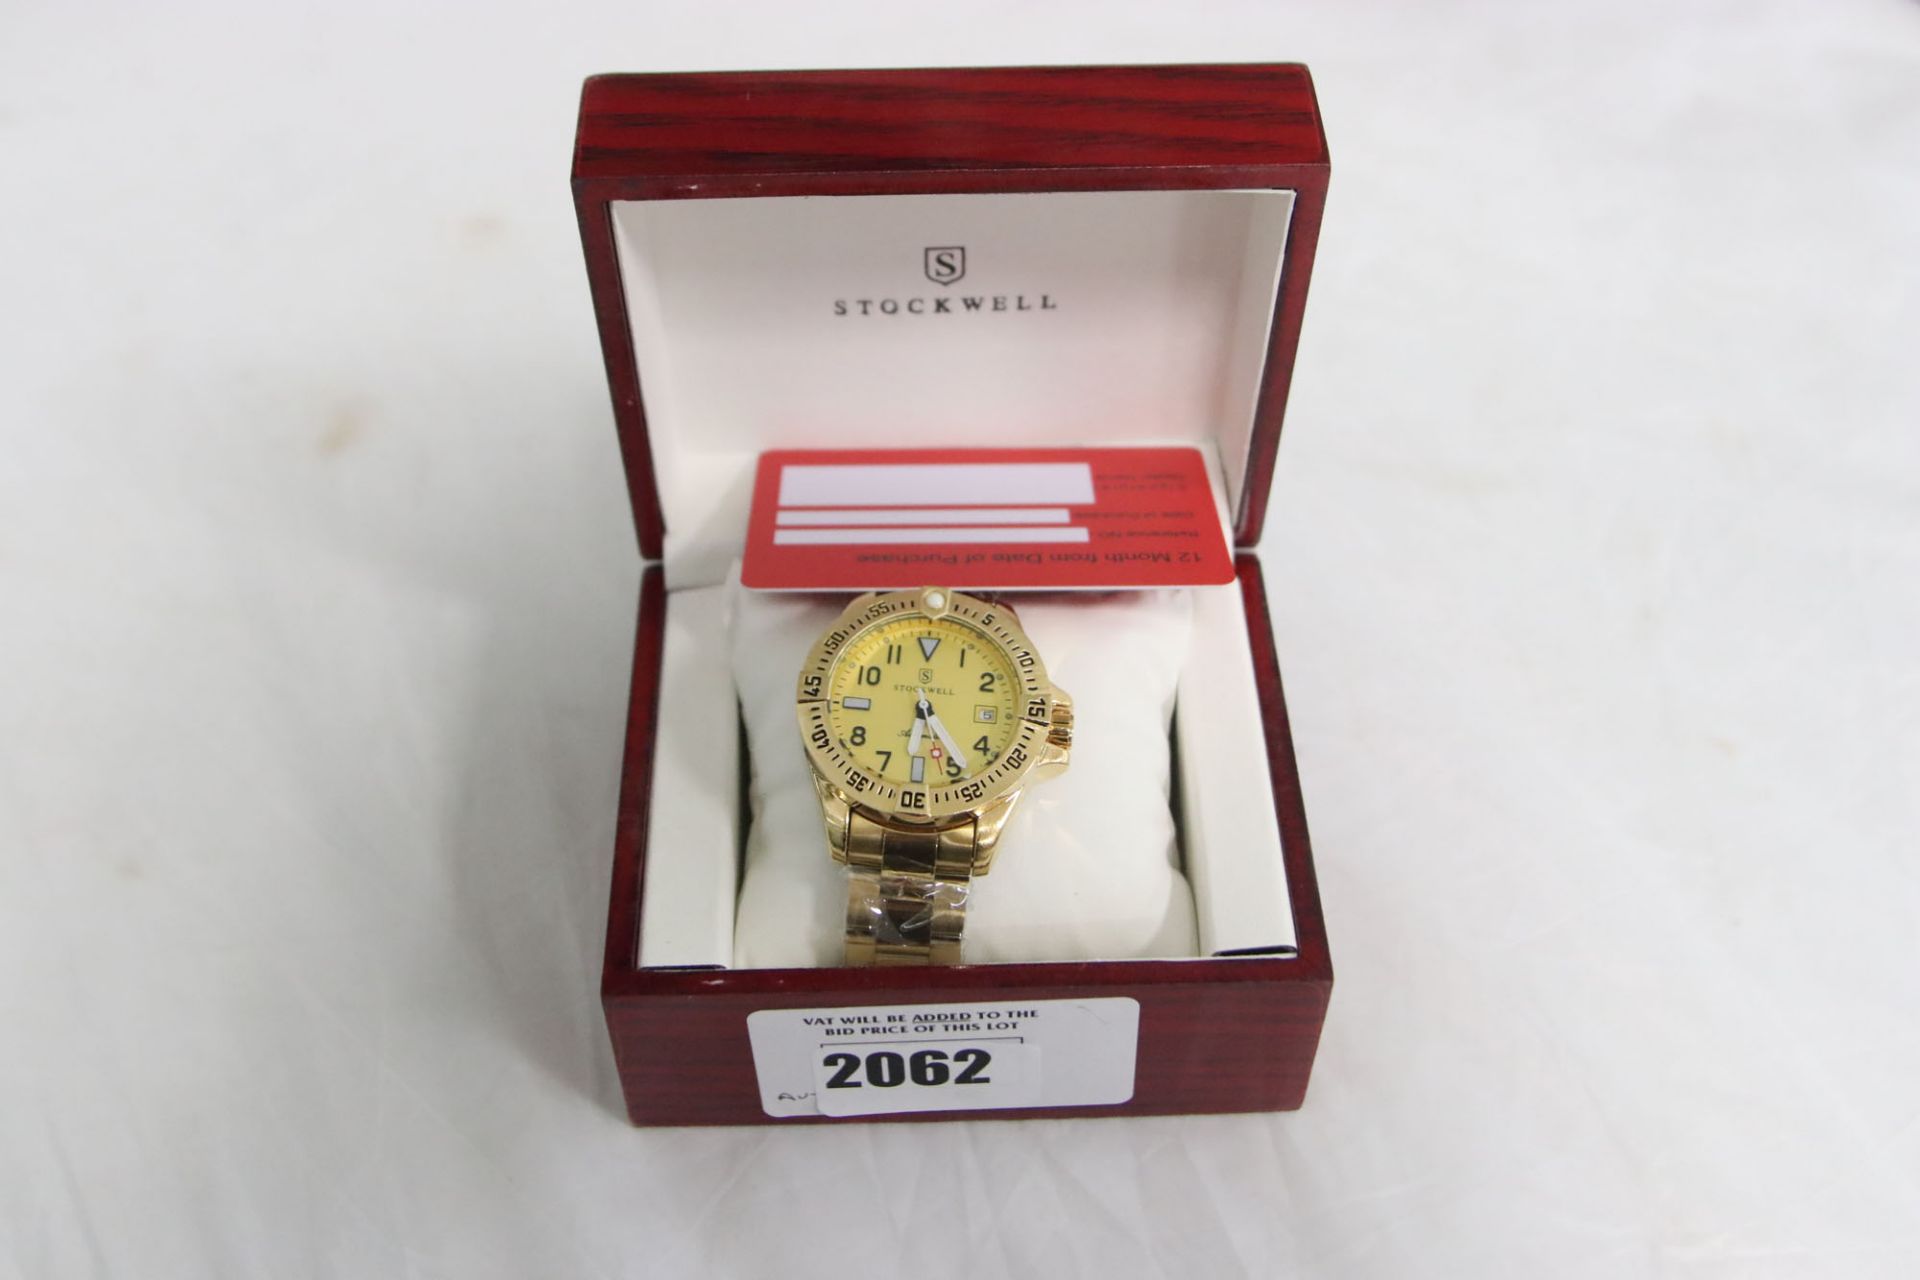 Stockwell gents automatic wristwatch in yellow stainless steel finish with box